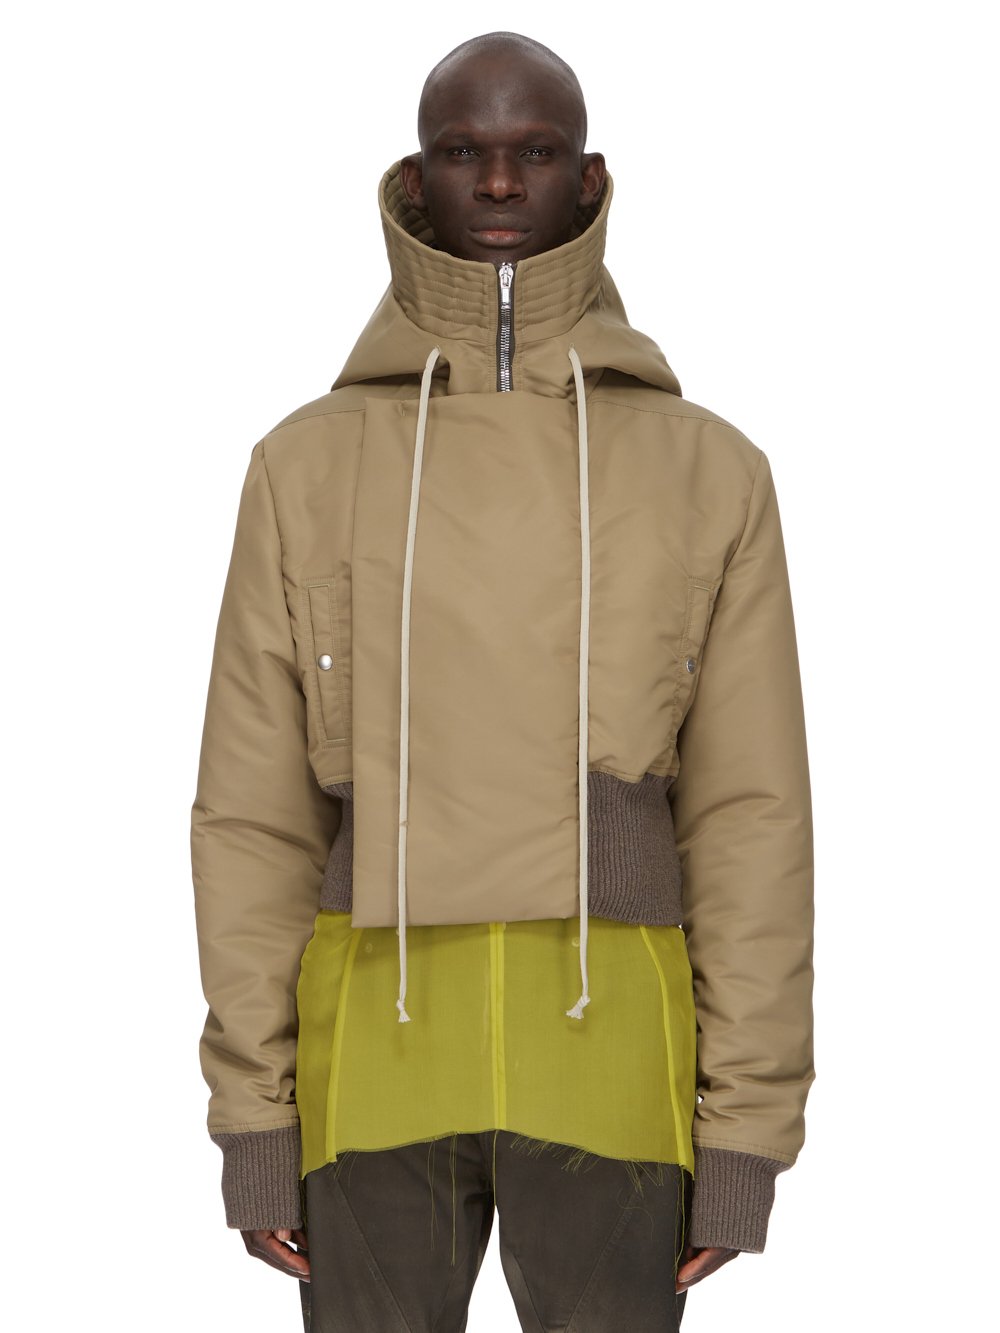 RICK OWENS FW23 LUXOR RUNWAY CROPPED ALICE PARKA IN PALE GREEN, DUST AND BLACK RECYCLED BOMBER